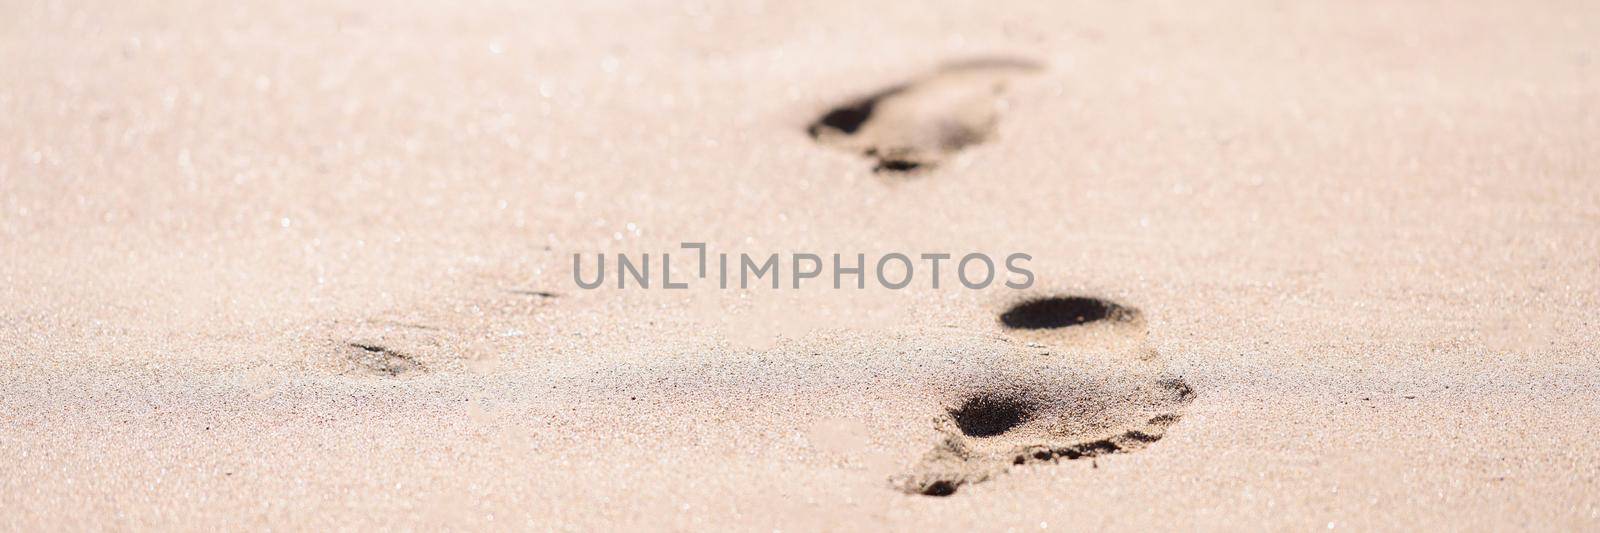 Barefoot prints on wet sand on beach closeup background by kuprevich